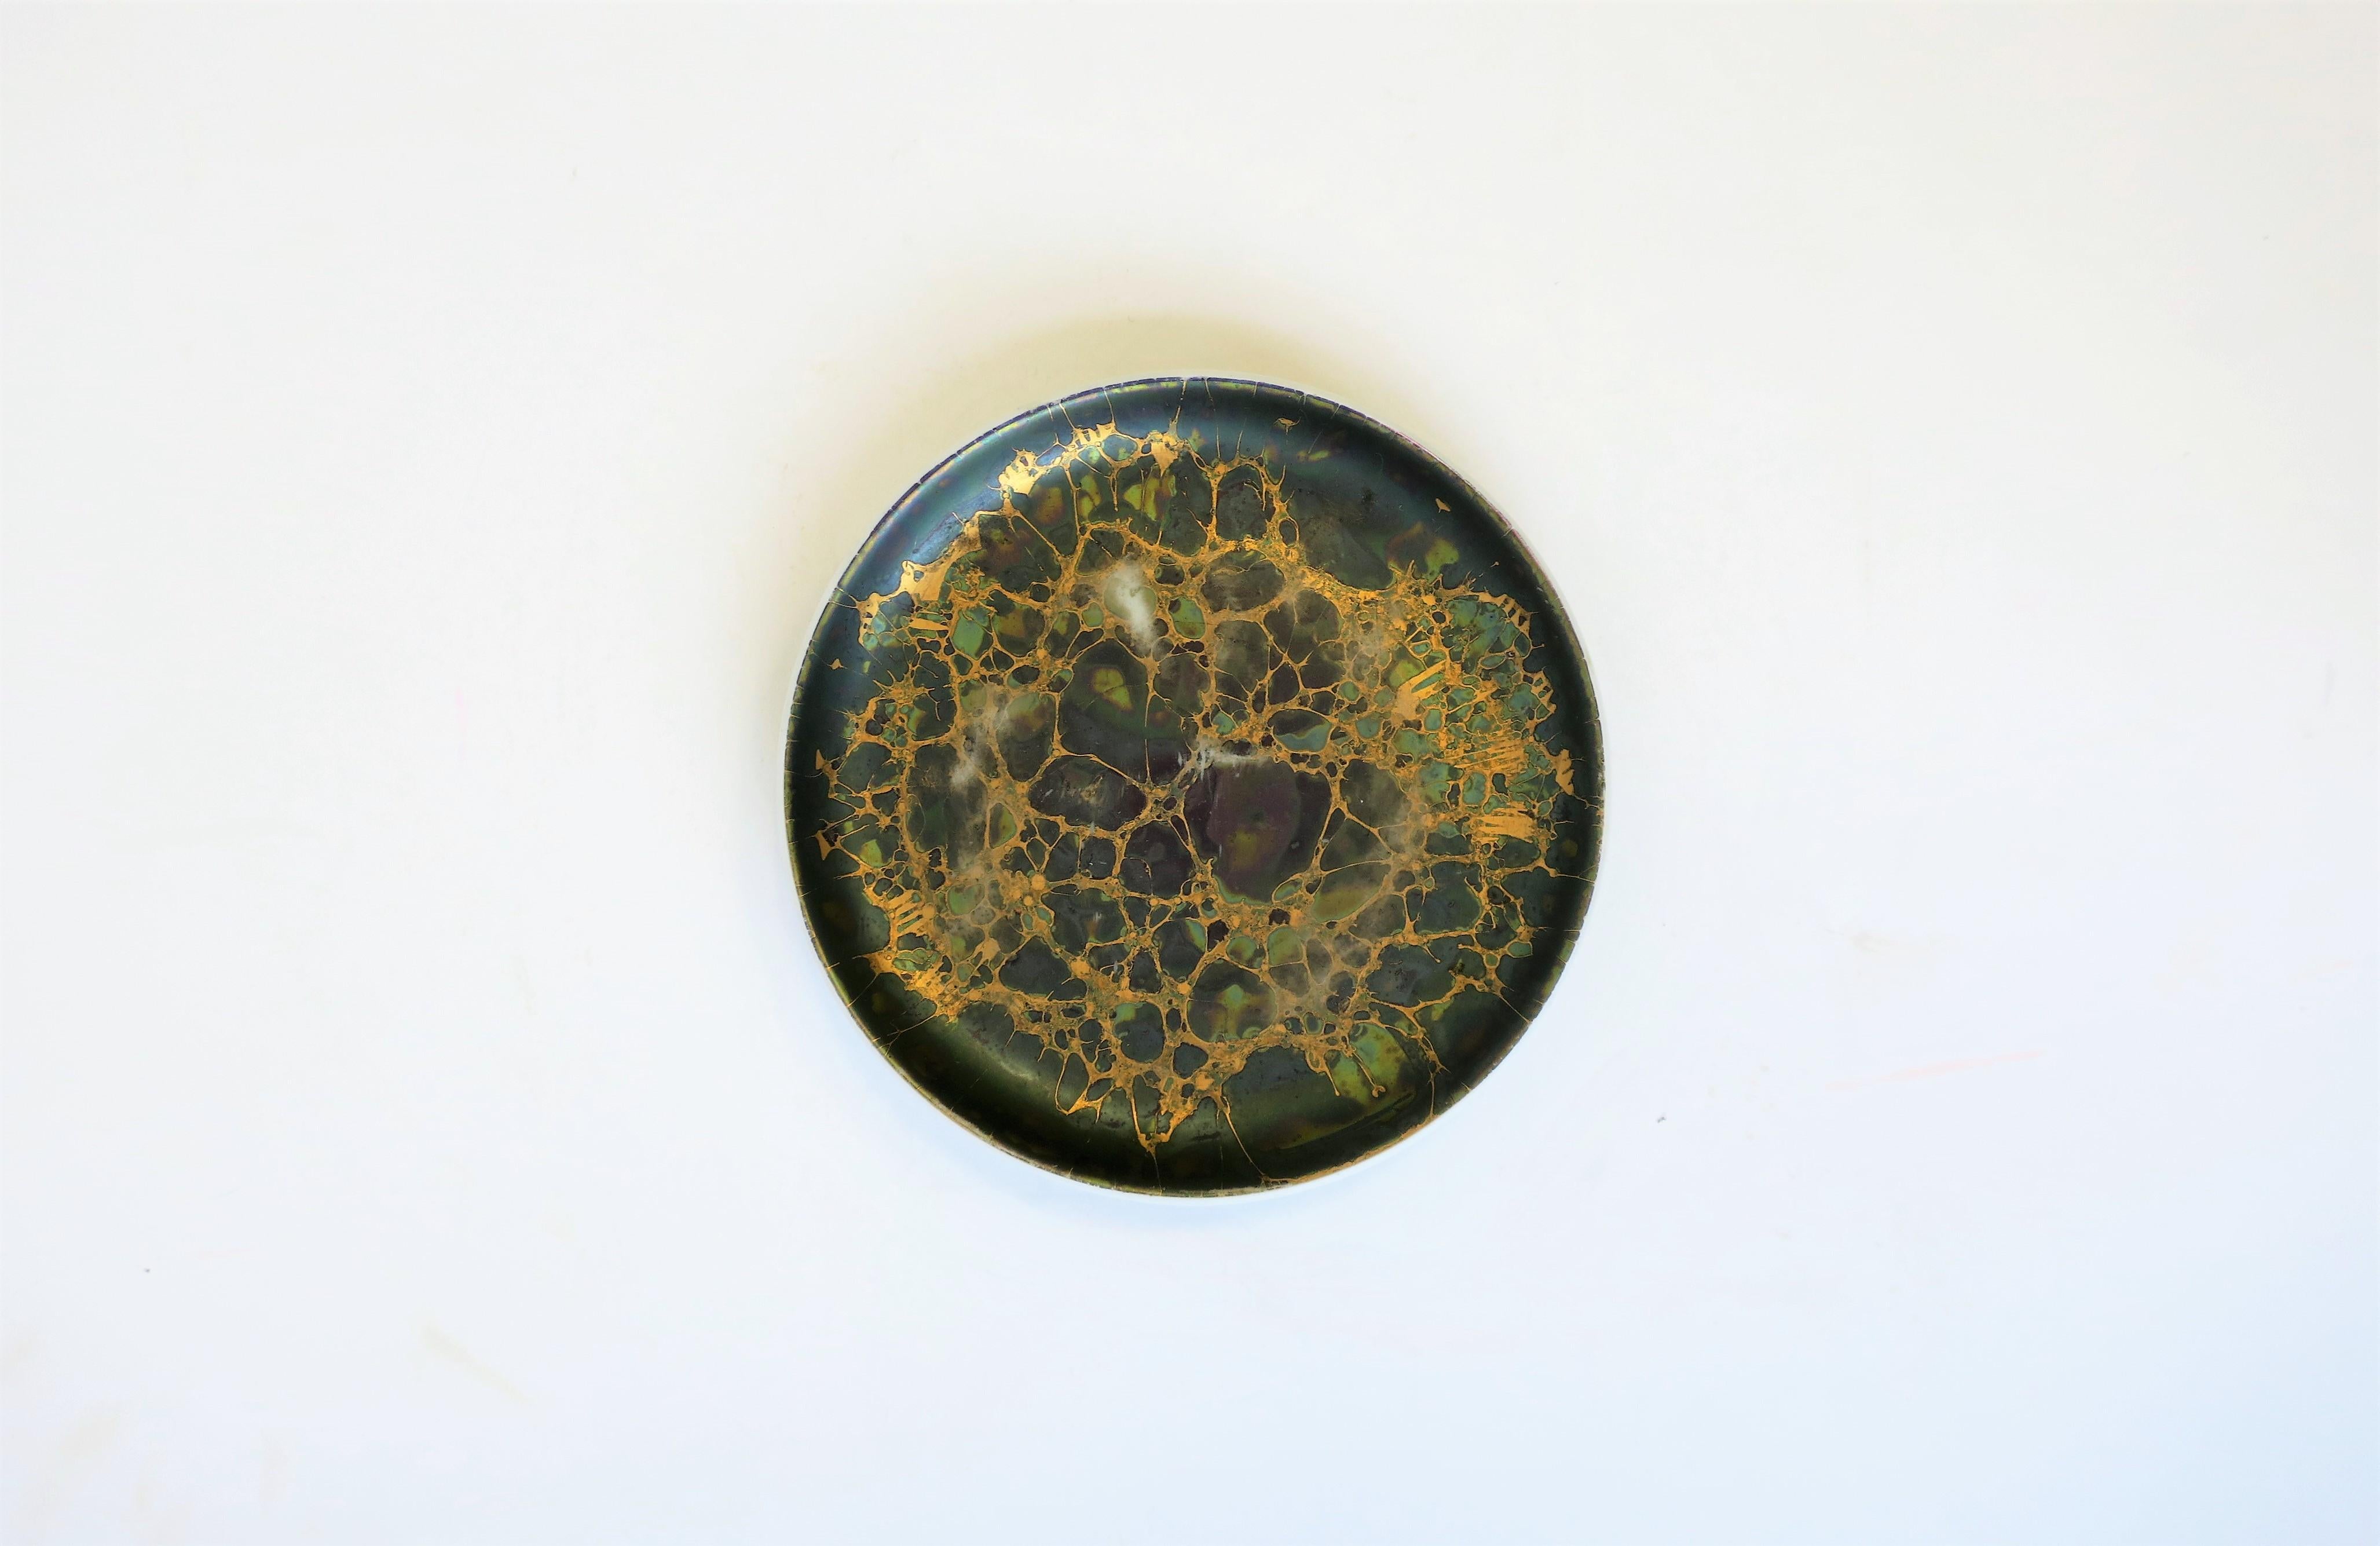 A German dark green and gold porcelain round jewelry dish by Rosenthal for its Studio-Line collection. A great piece for a desk, nightstand or vanity area. Dish has an un-glazed finish on top, glazed on bottom. With marker's mark's as shown in image